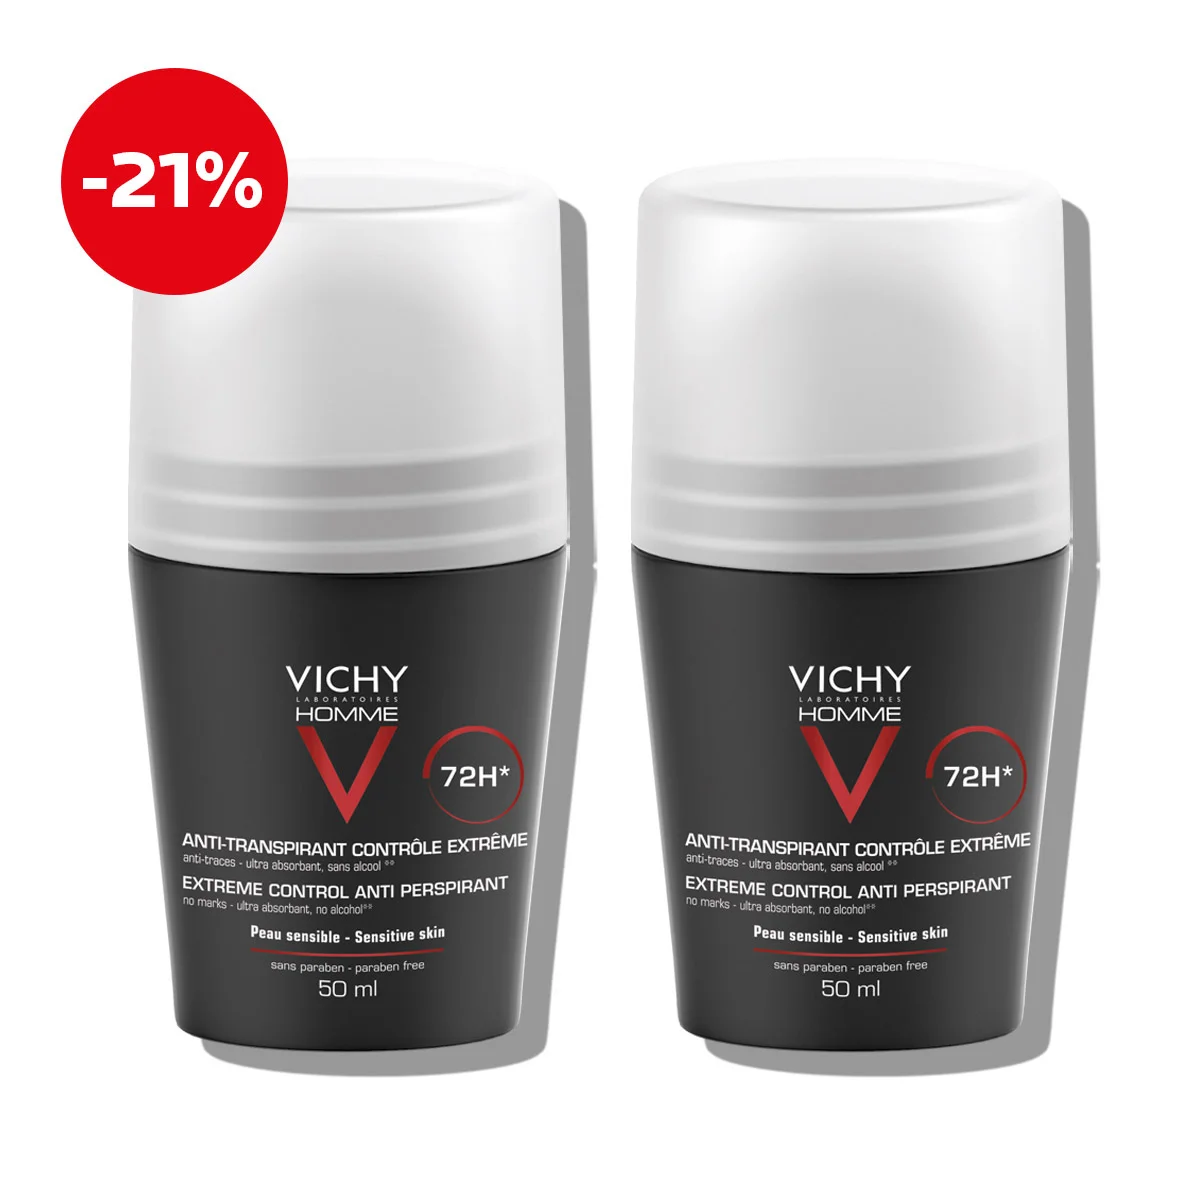 Vichy Homme Deo-Duo pack; Antiperspirant roll-on for protection against sweating for up to 72 hours (1)